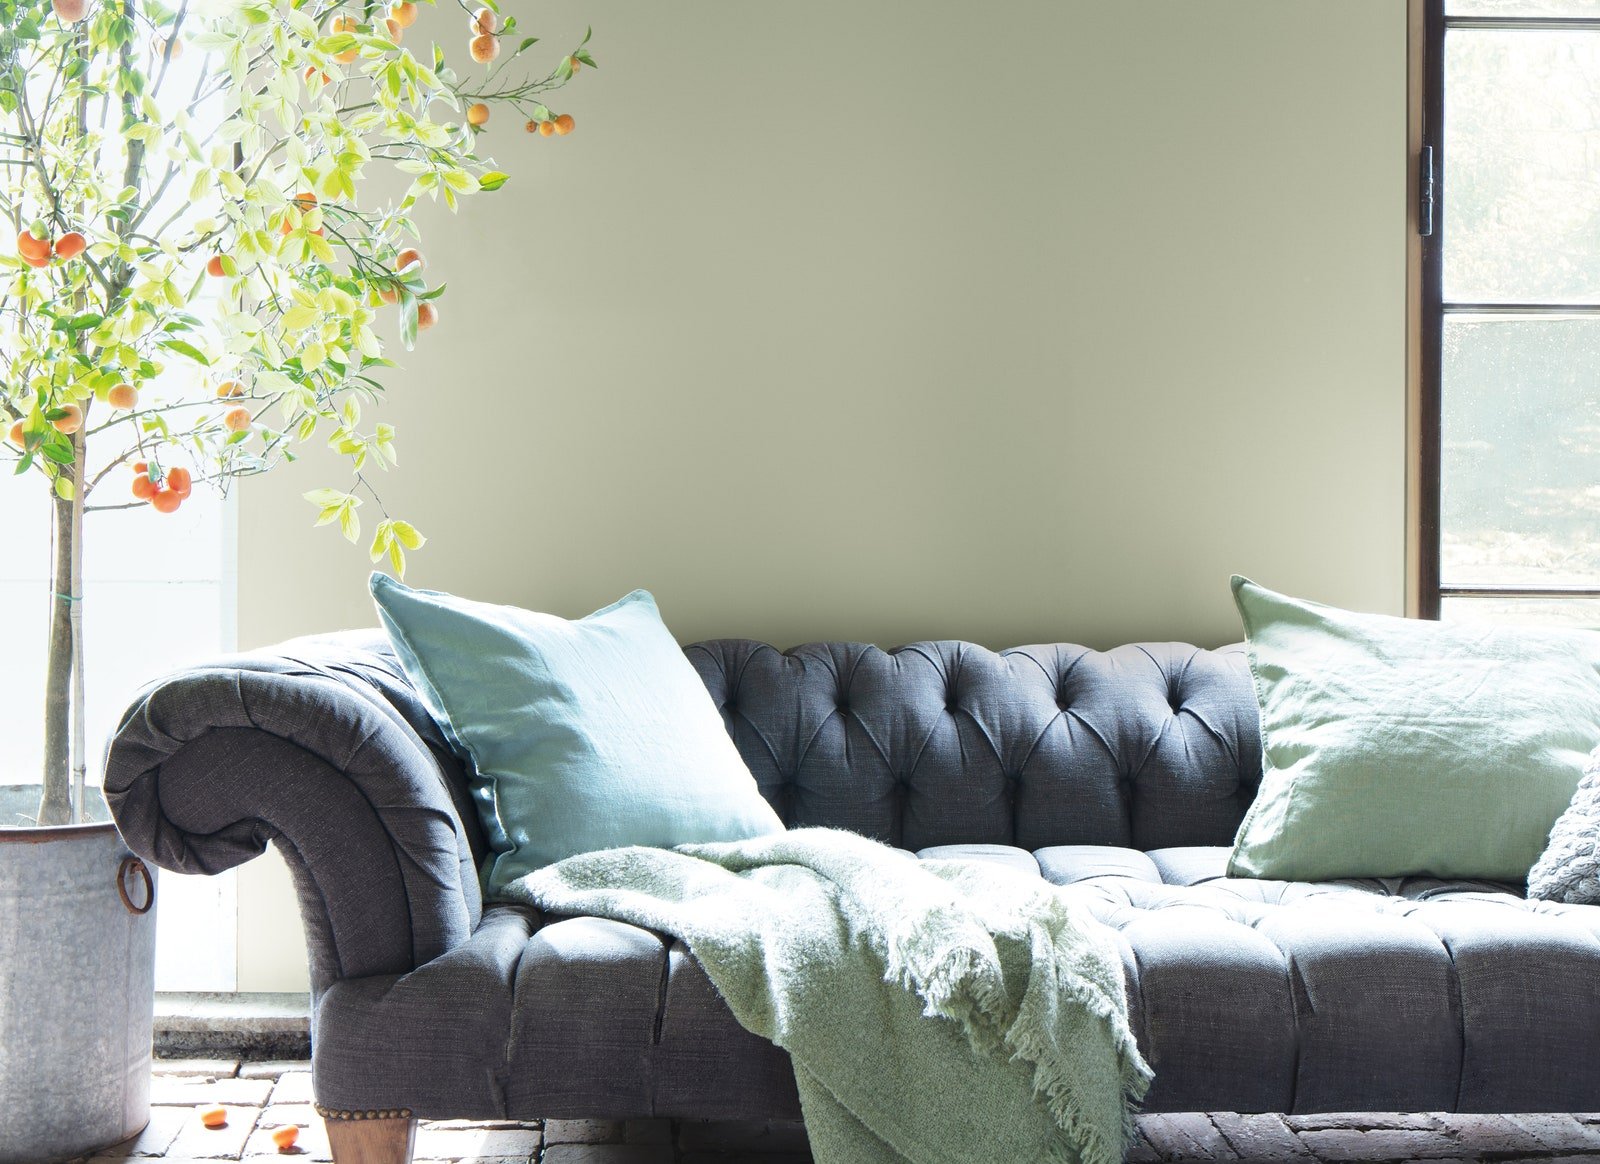 benjamin moore october mist color of the year painted on a wall with gray tufted sofa in front with sage pillows on it